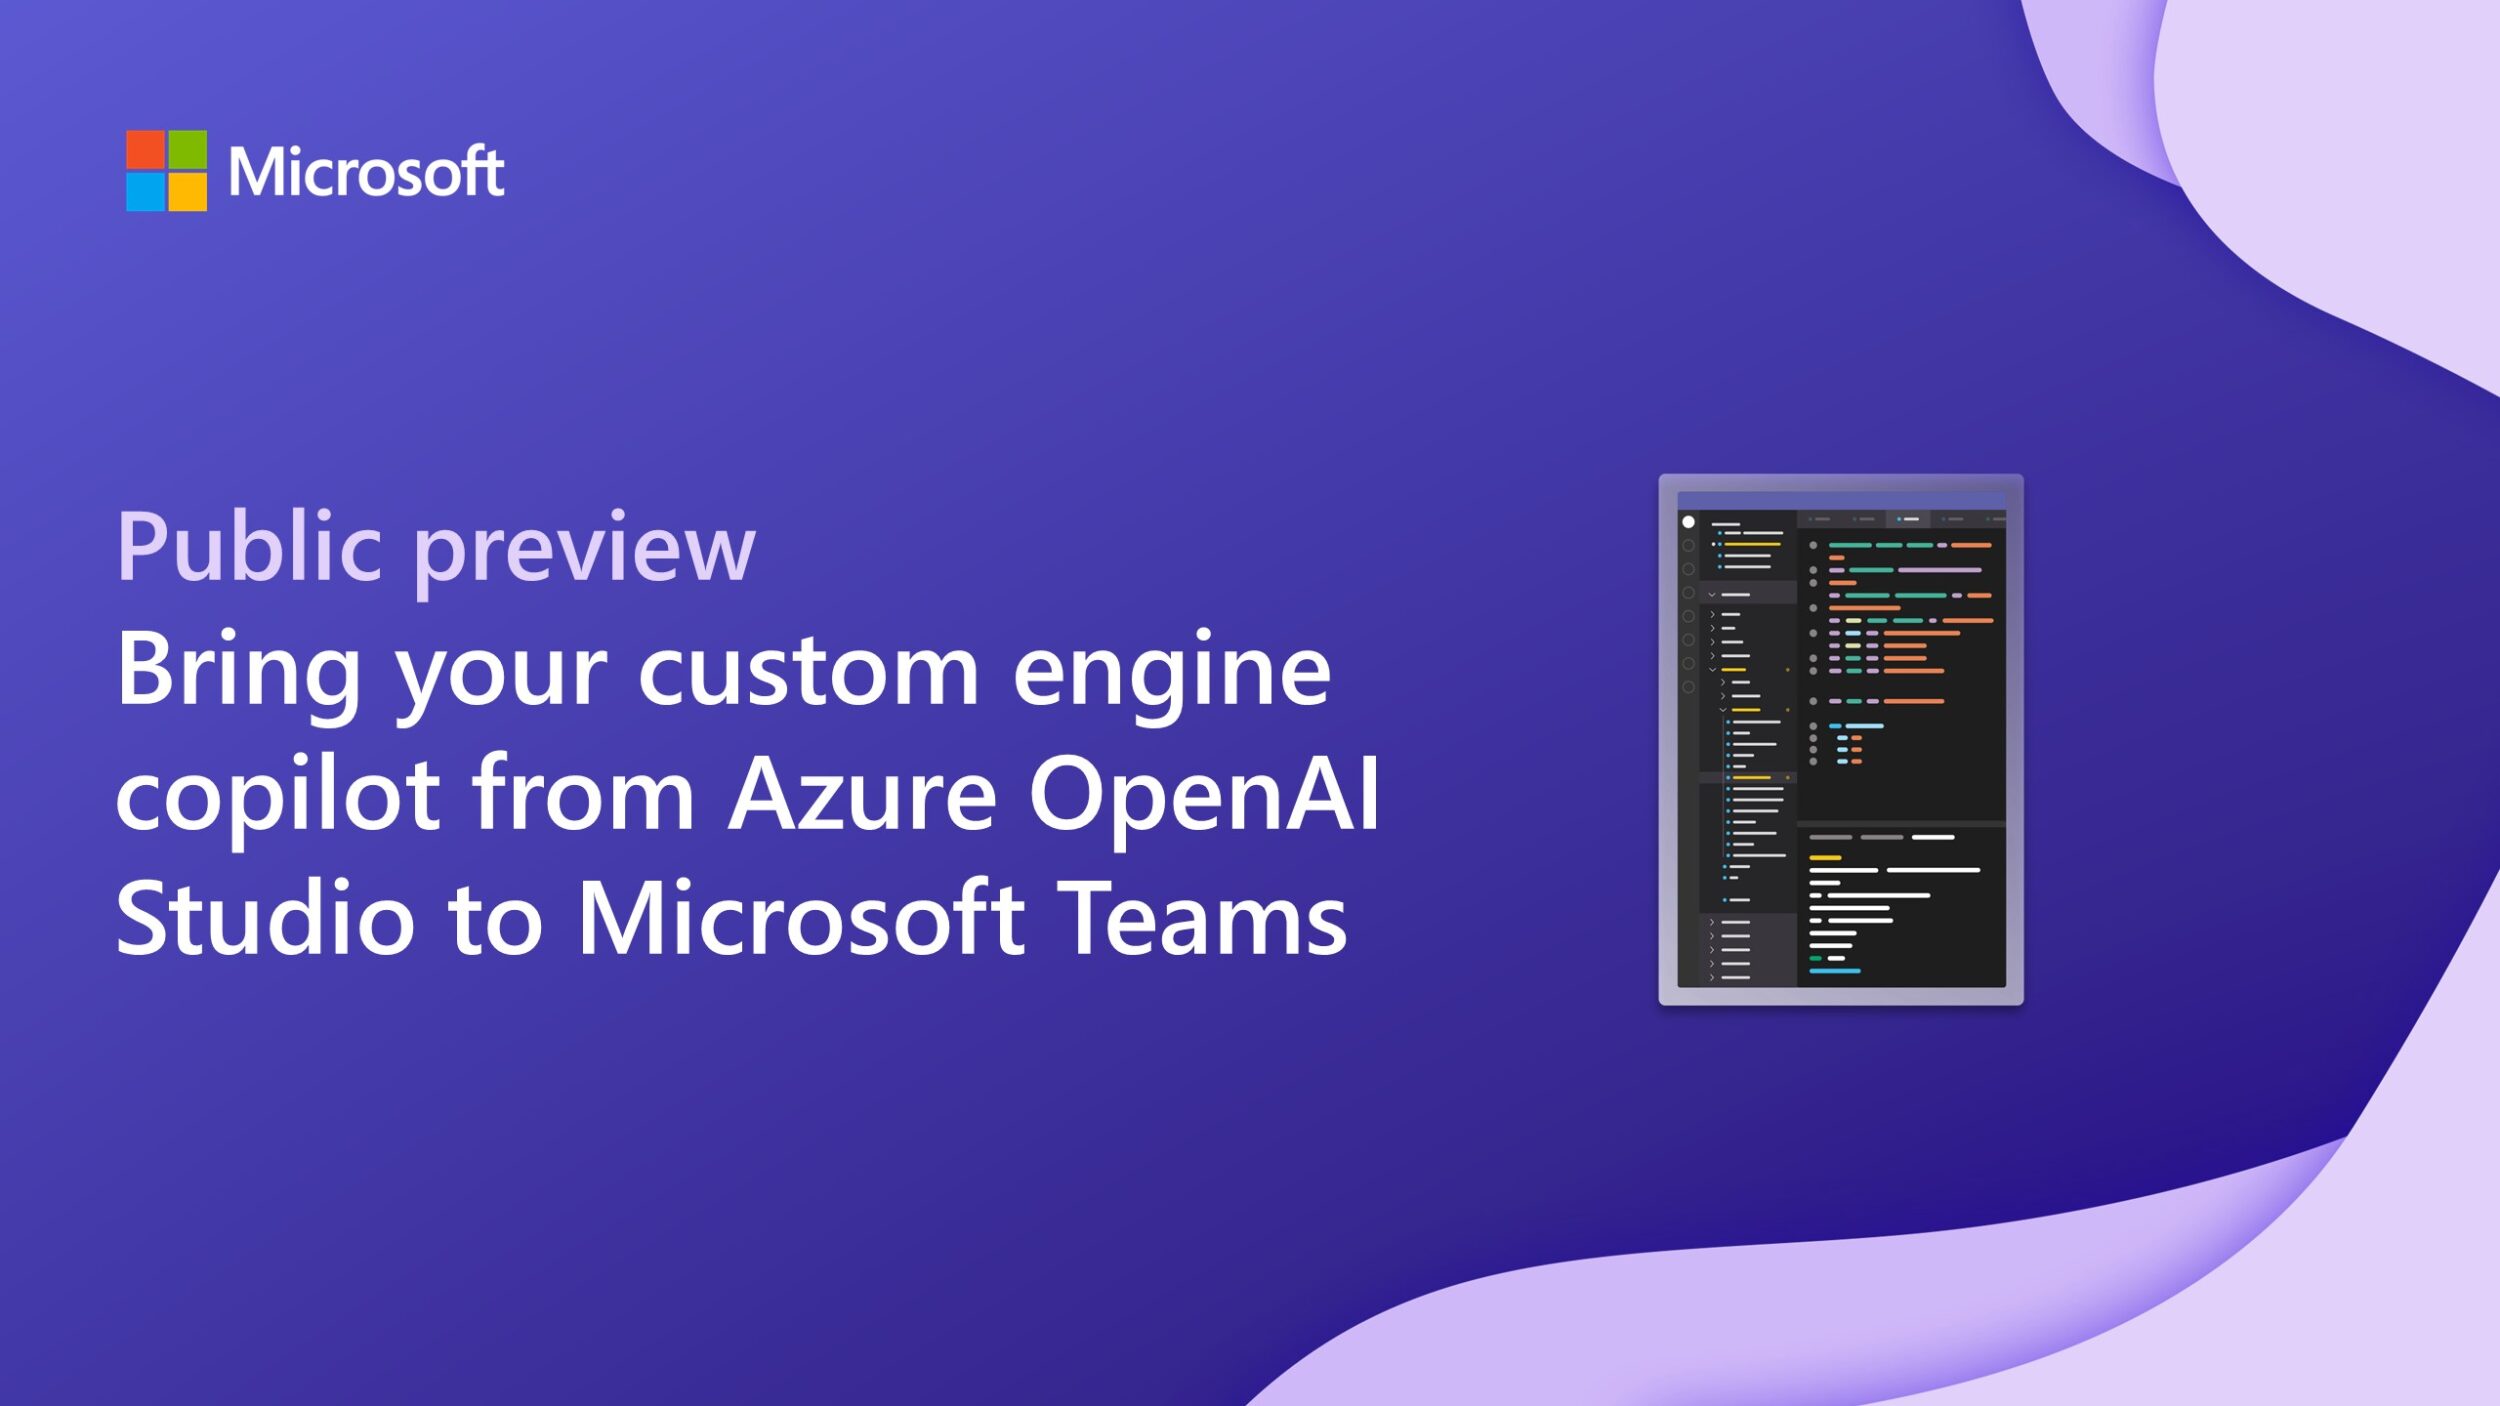 Bring your custom engine copilot from Azure OpenAI Studio to Microsoft Teams: now in public preview